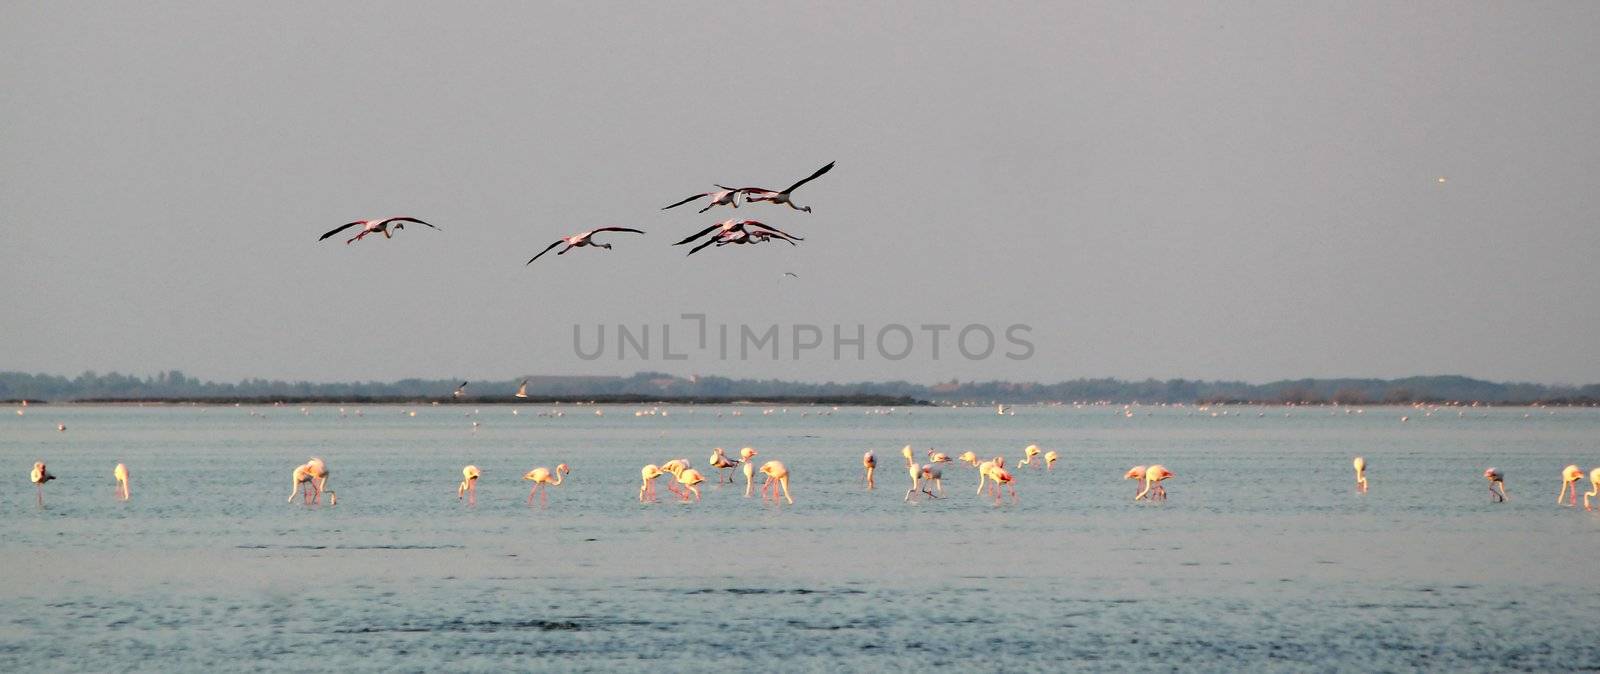 Flamingos flying upon others in Camargue, France